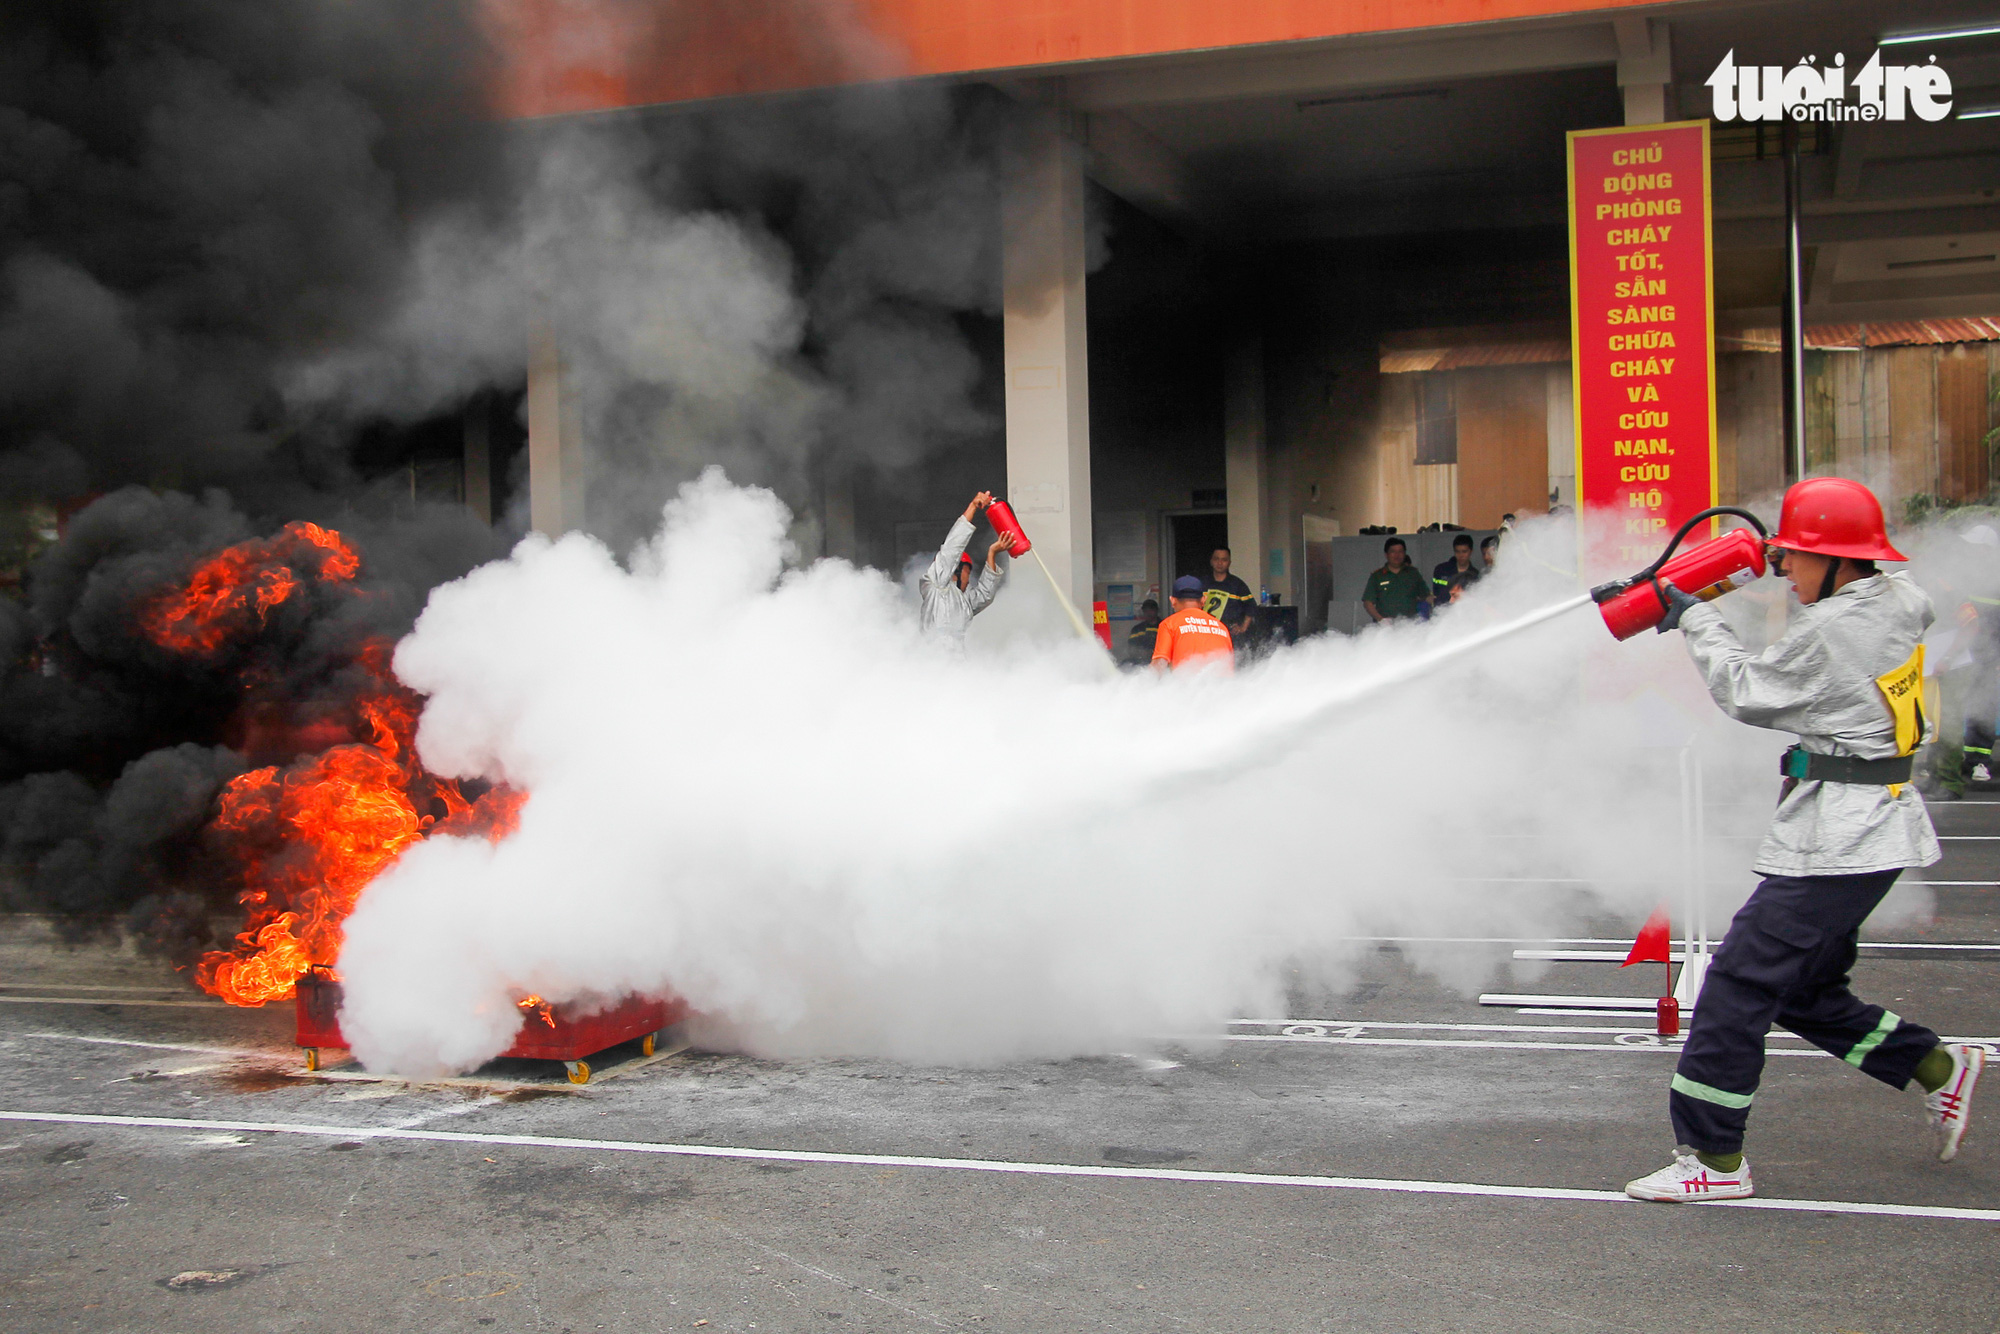 A firefighter puts out a fire with a fire extinguisher during a firefighting and rescue competition in Ho Chi Minh City, June 16, 2020. Photo: Chau Tuan / Tuoi Tre